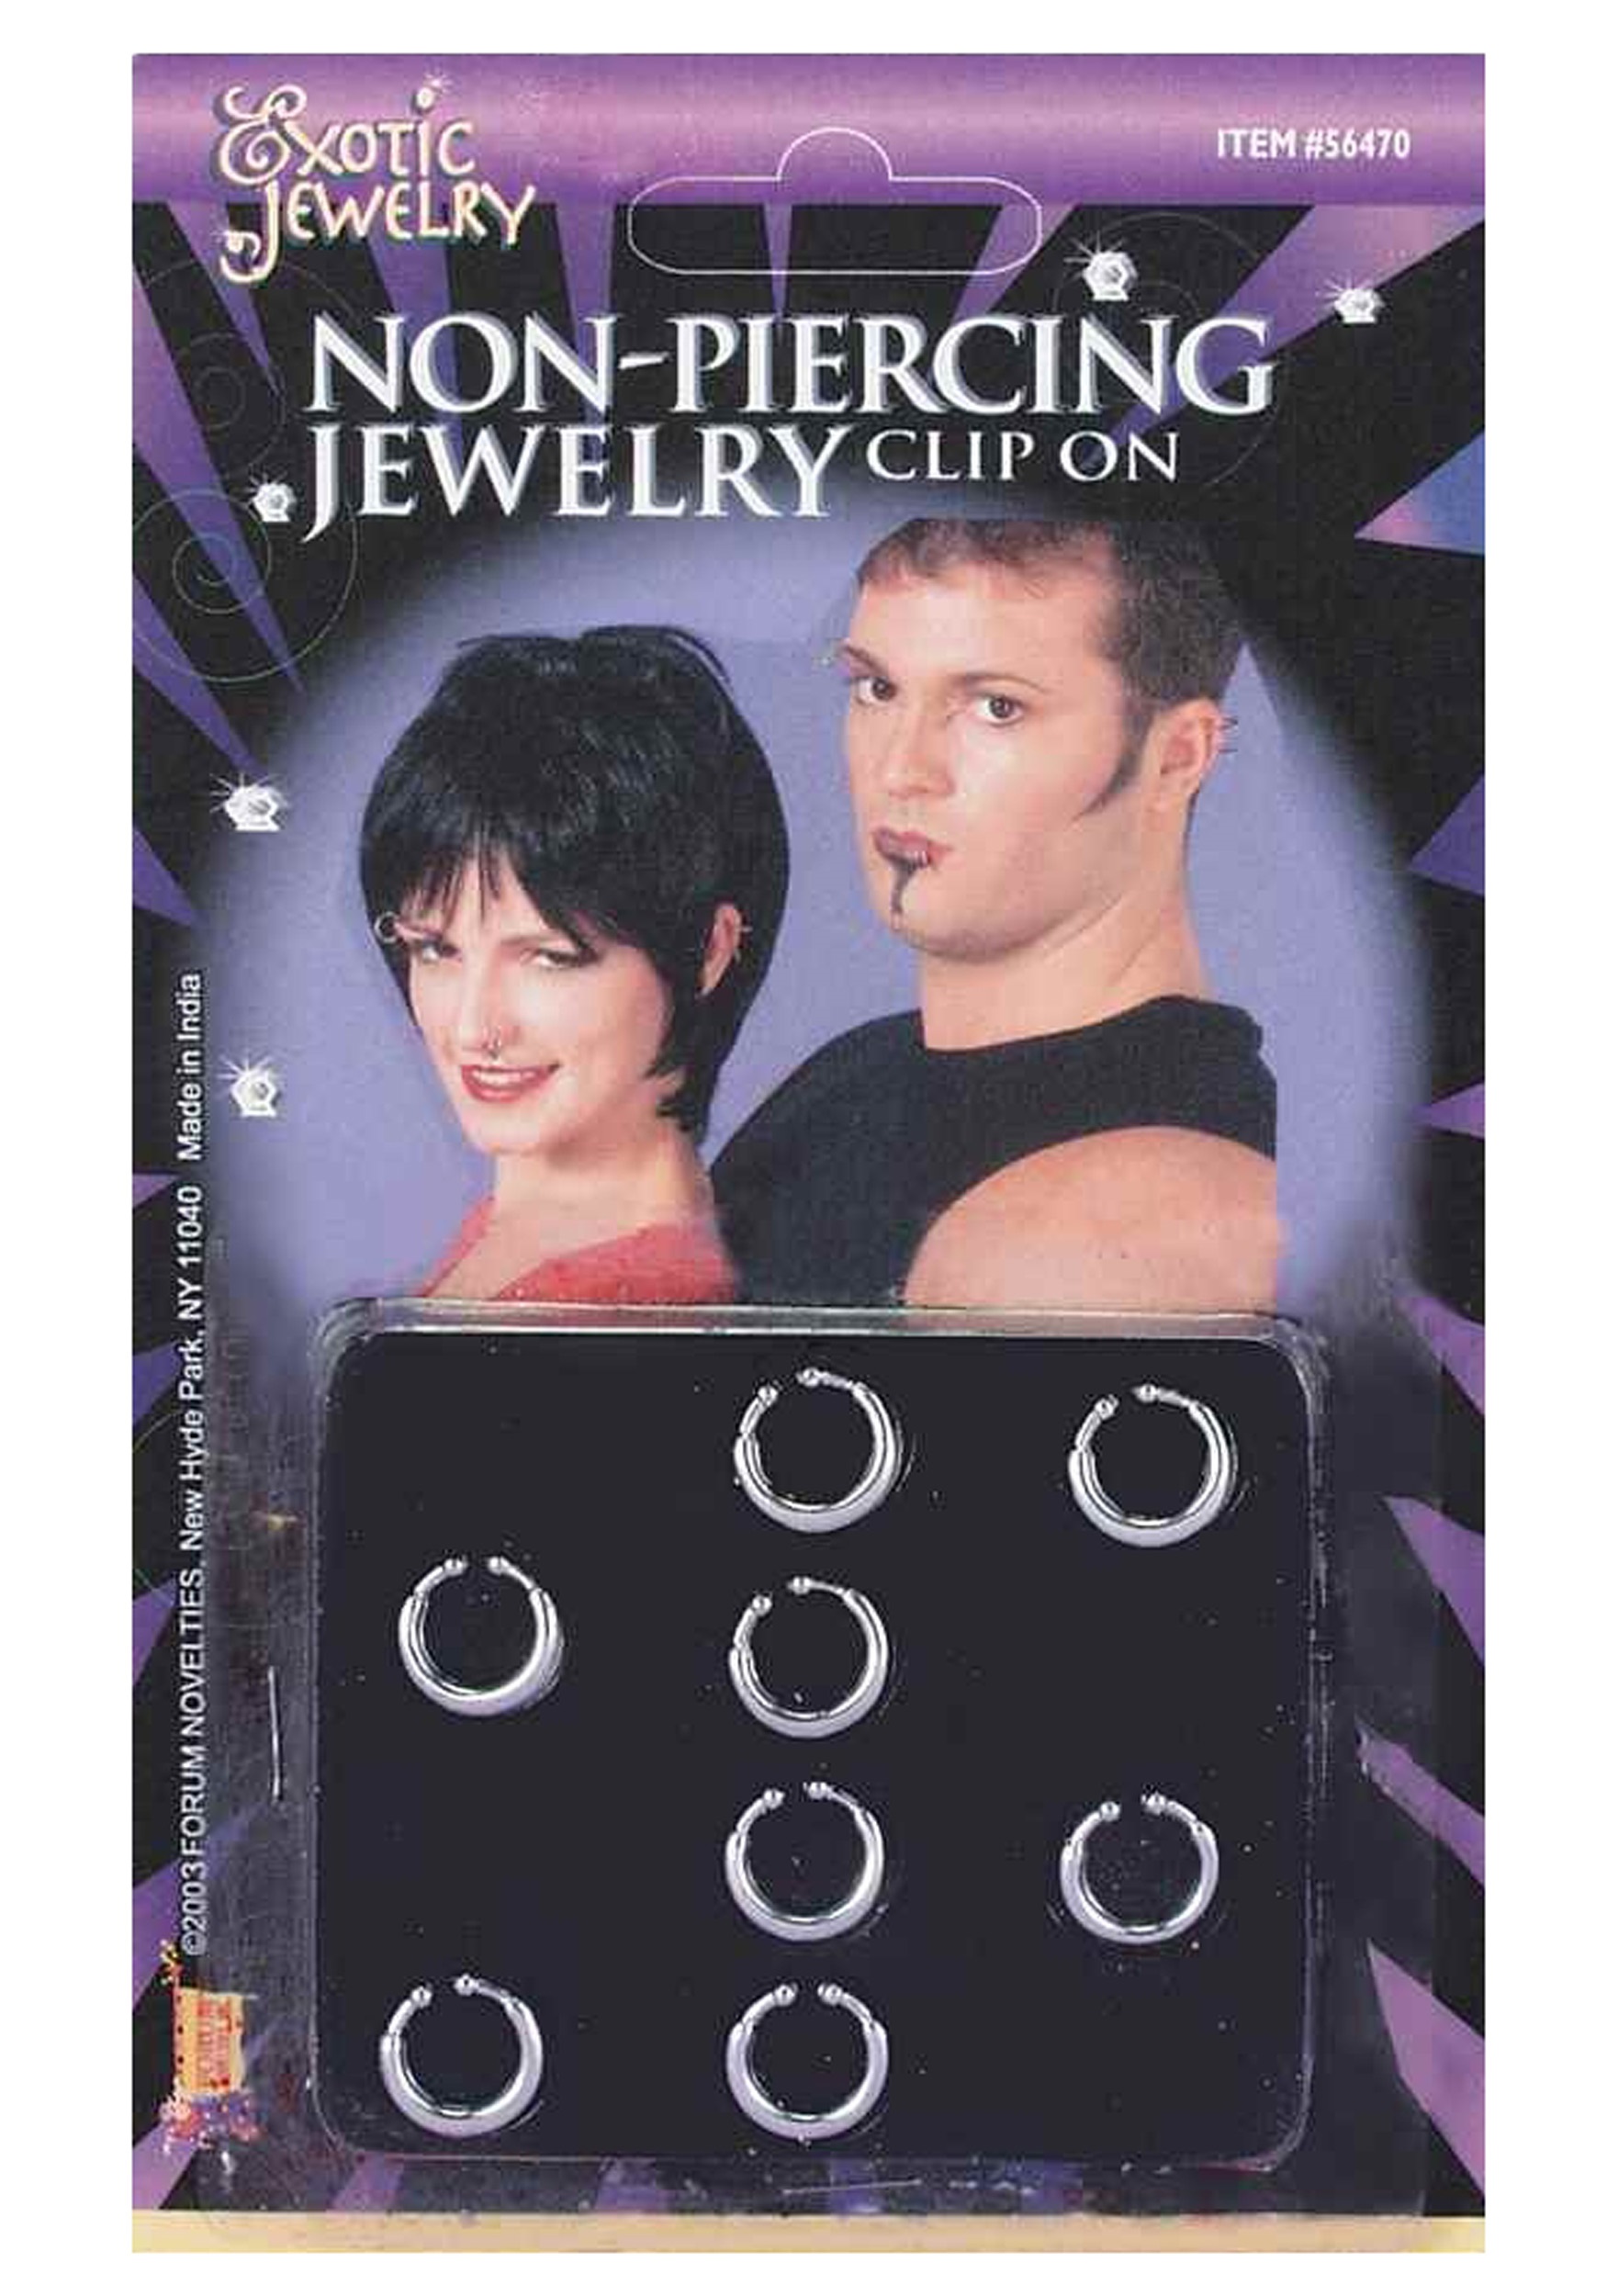 https://images.halloweencostumes.com/products/15717/1-1/non-piercing-body-jewelry.jpg